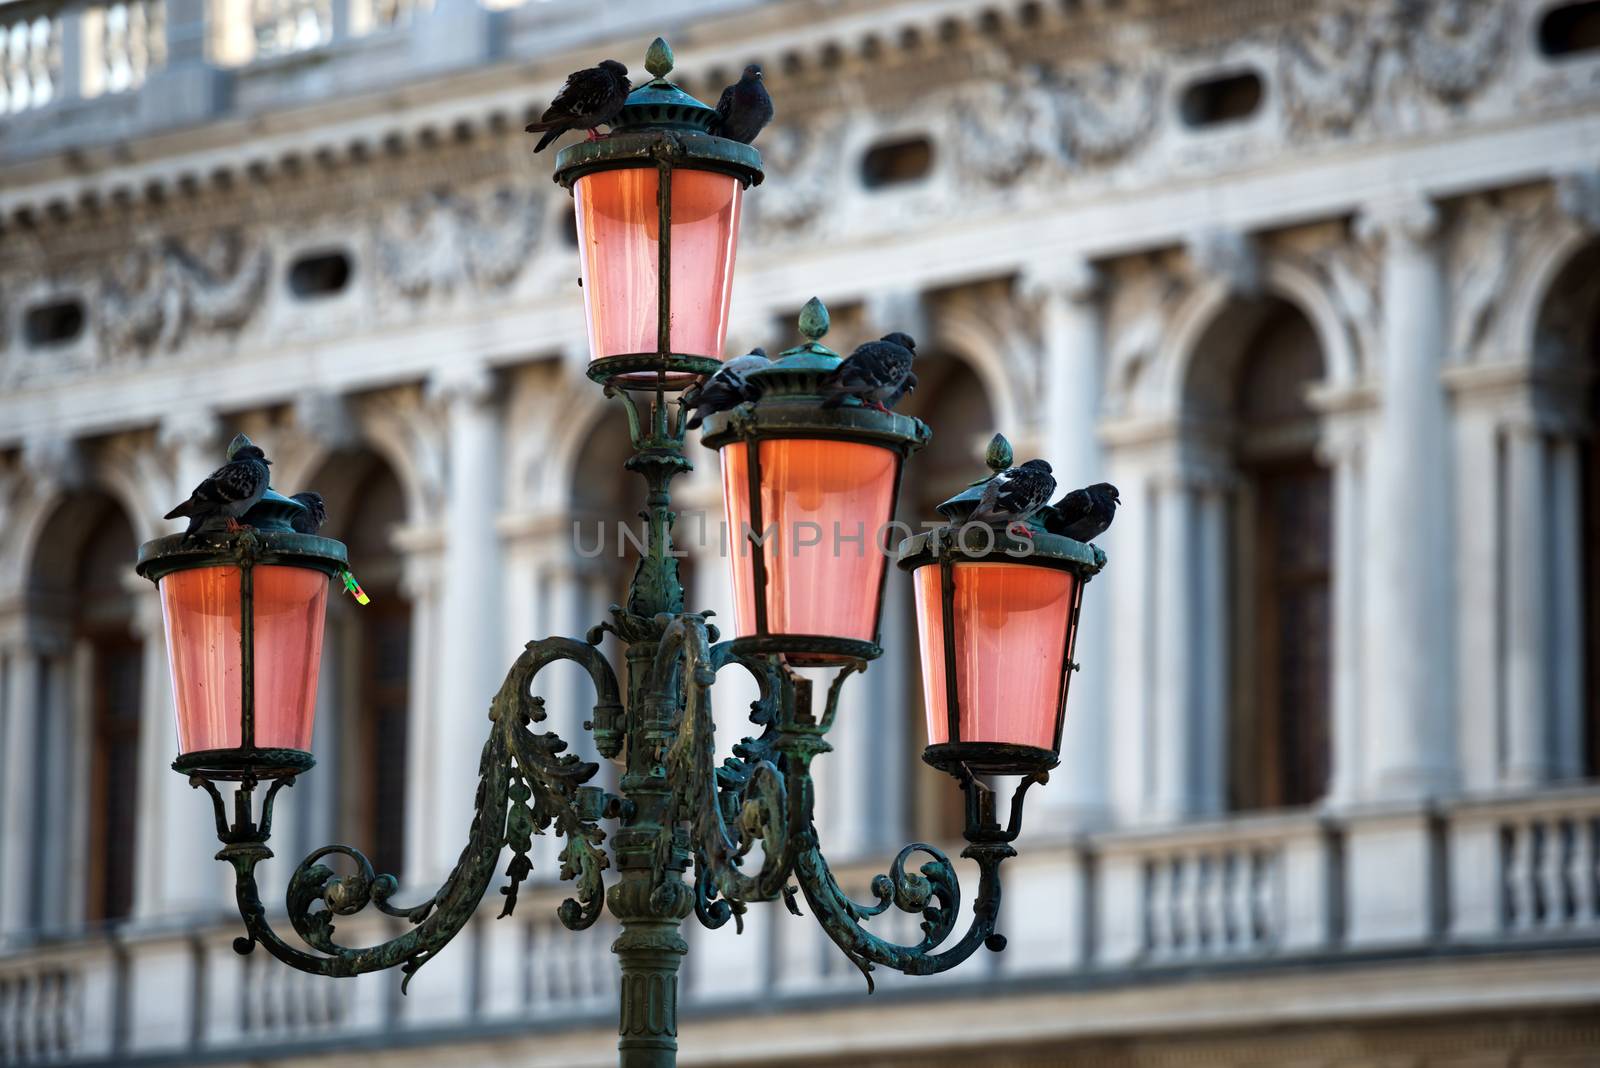 Lamp on Piazza San Marco (Saint Mark square) in Venice